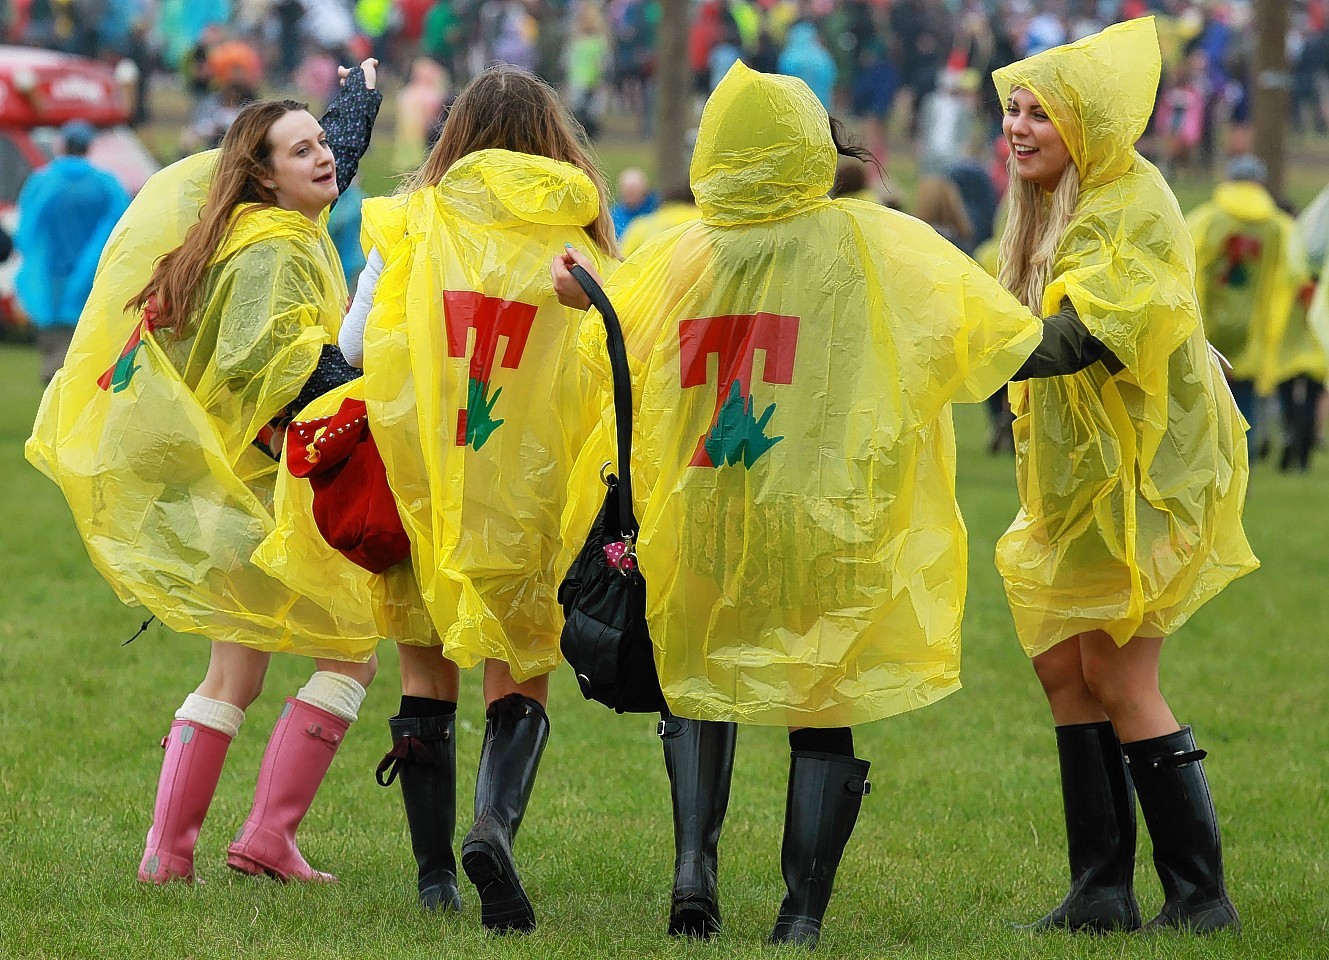 Fans trying to stay dry at T in the Park